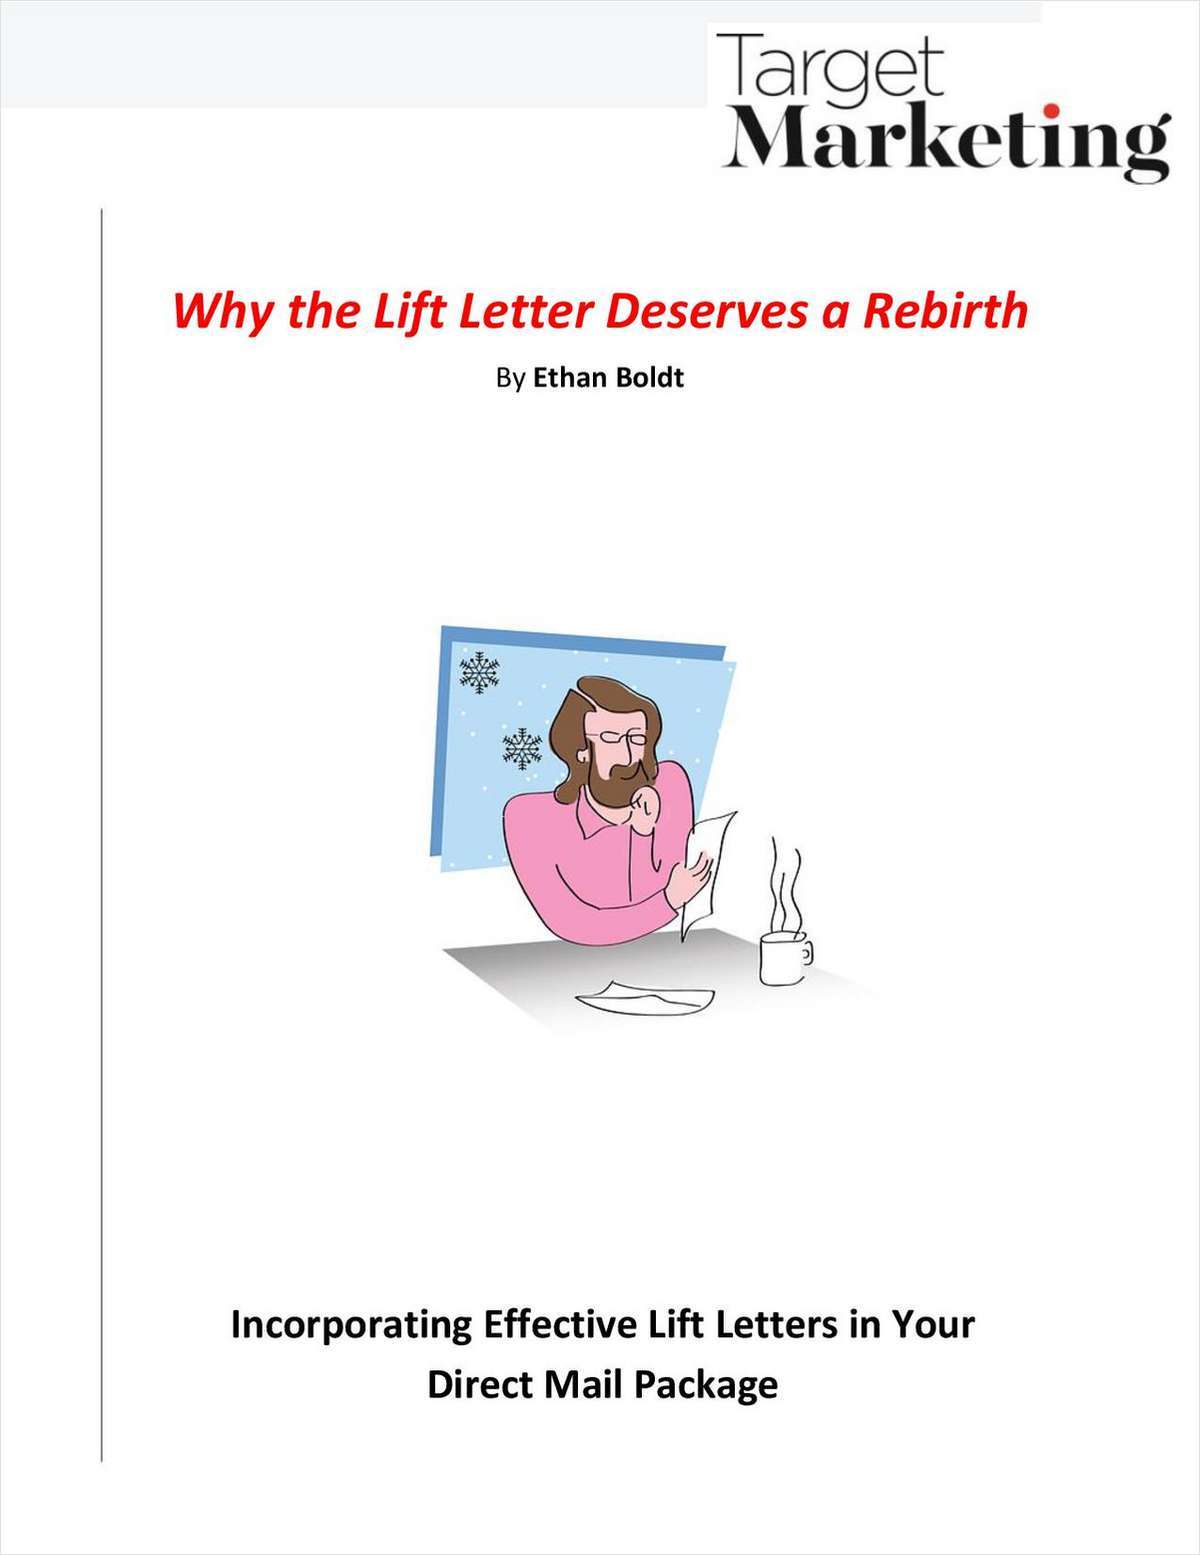 Why the Lift Letter Deserves a Rebirth